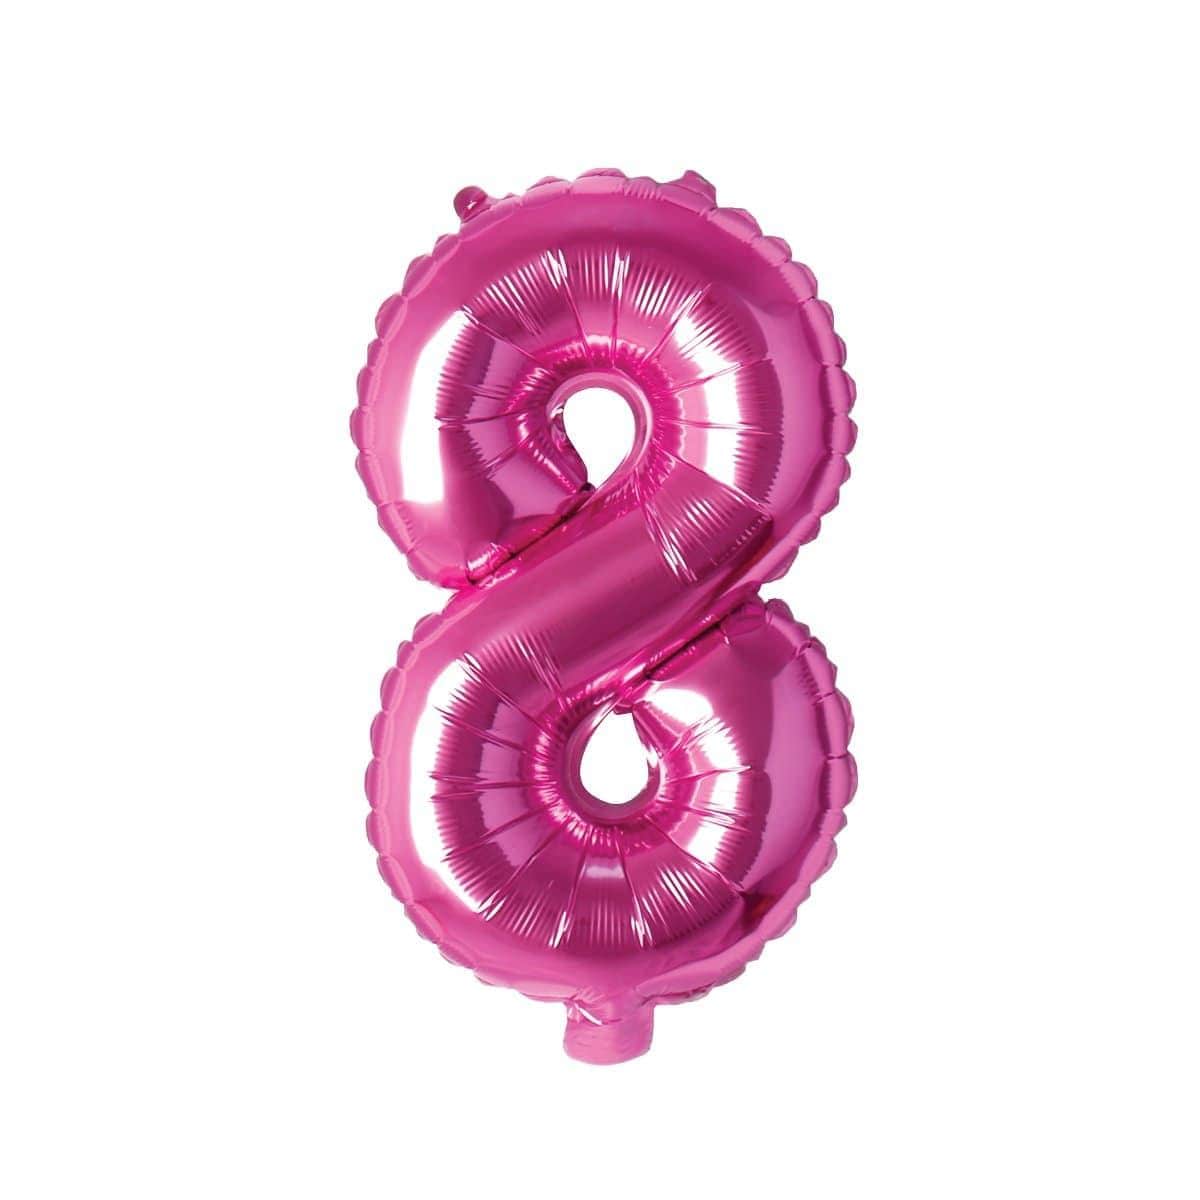 Buy Balloons Pink Number 8 Foil Balloon, 16 Inches sold at Party Expert